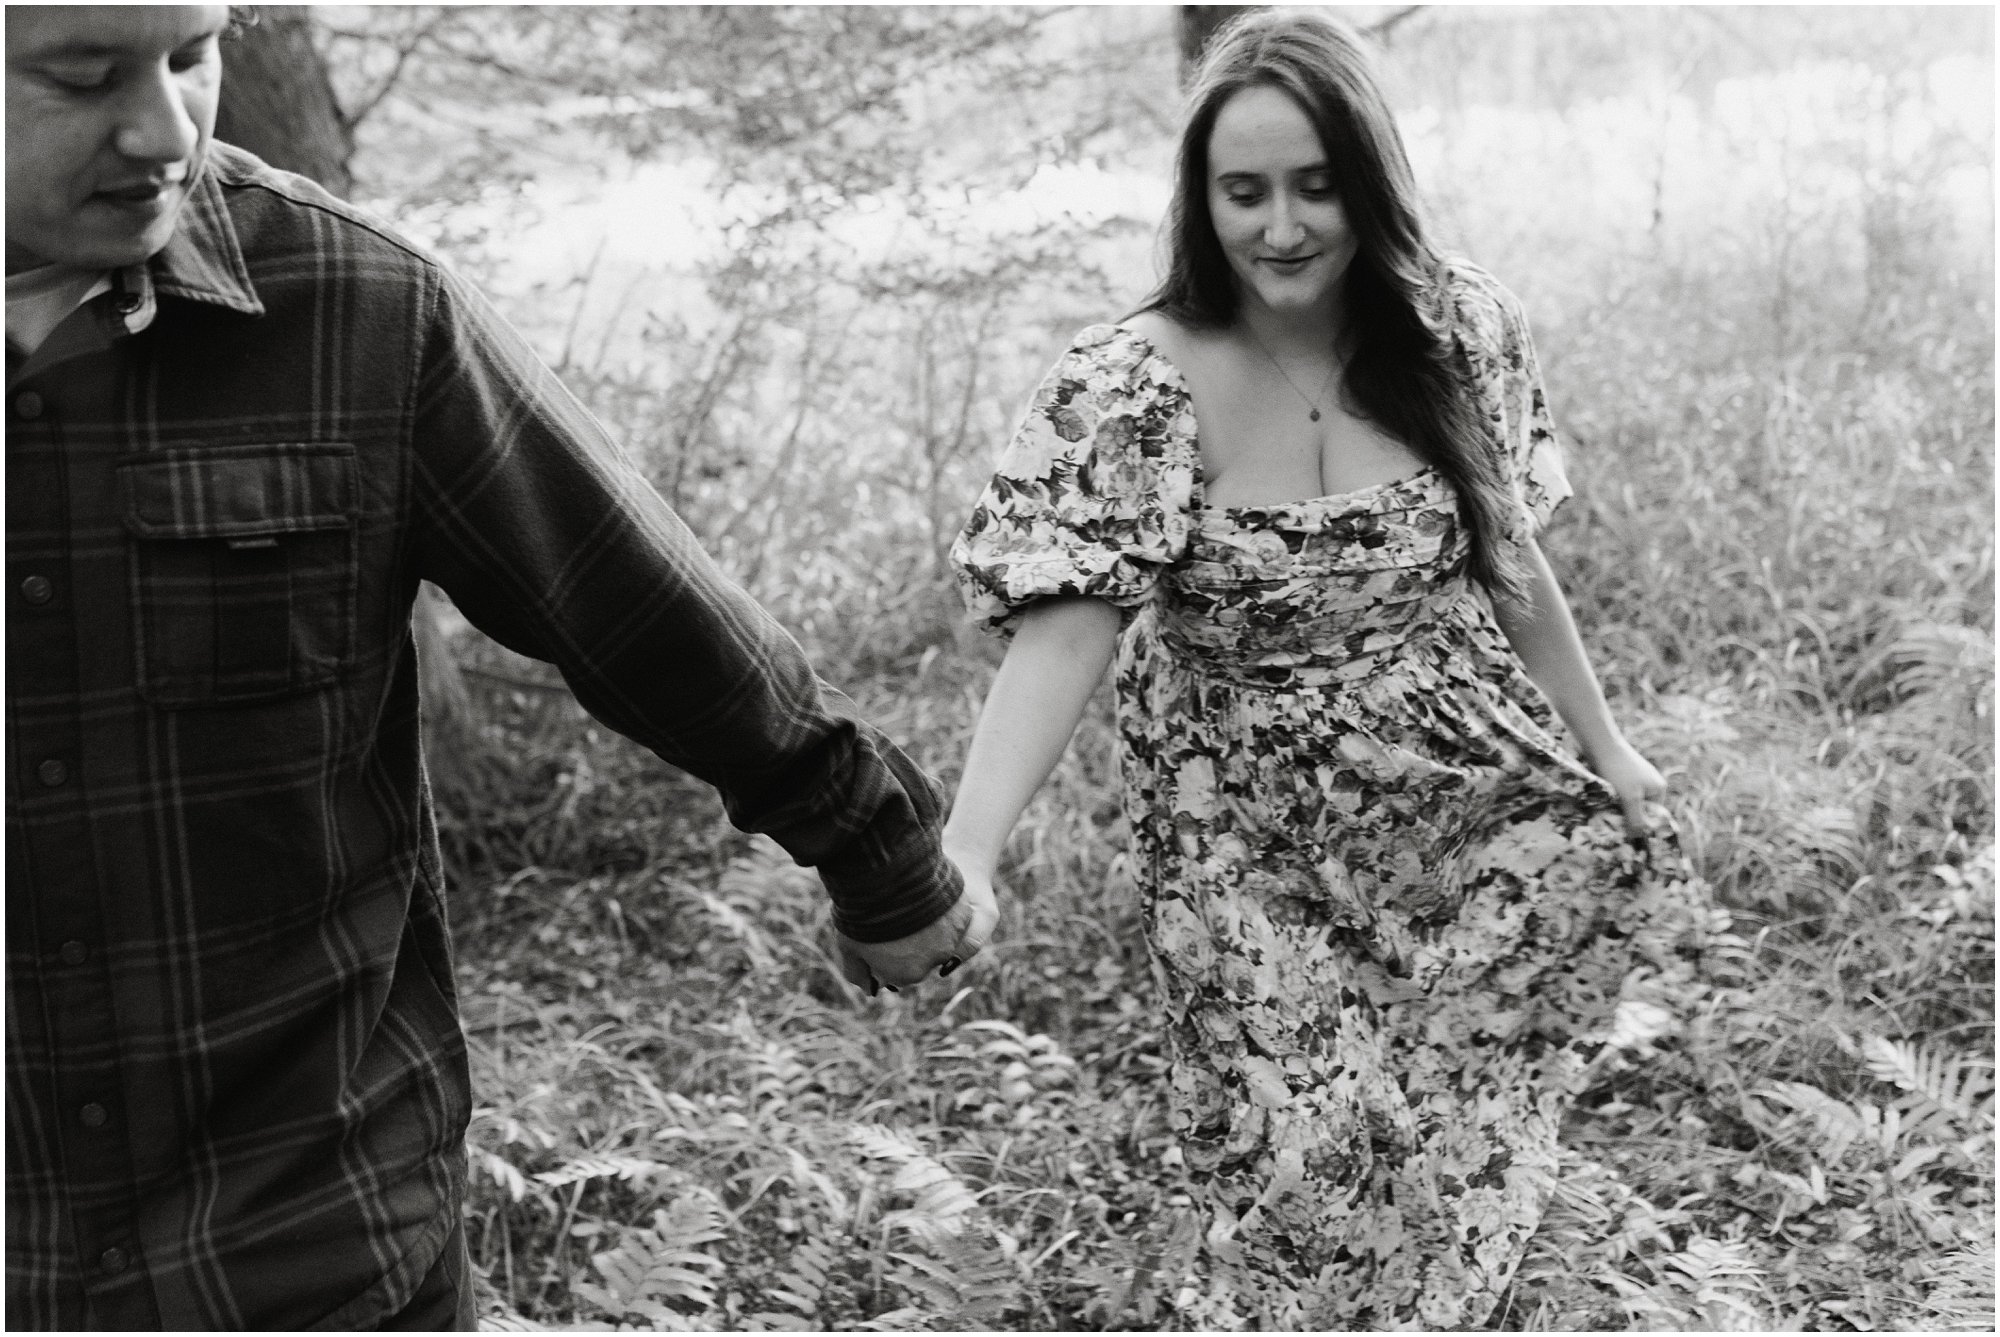 Woodsy Fall Engagement Session in the New Jersey Pine Barrens